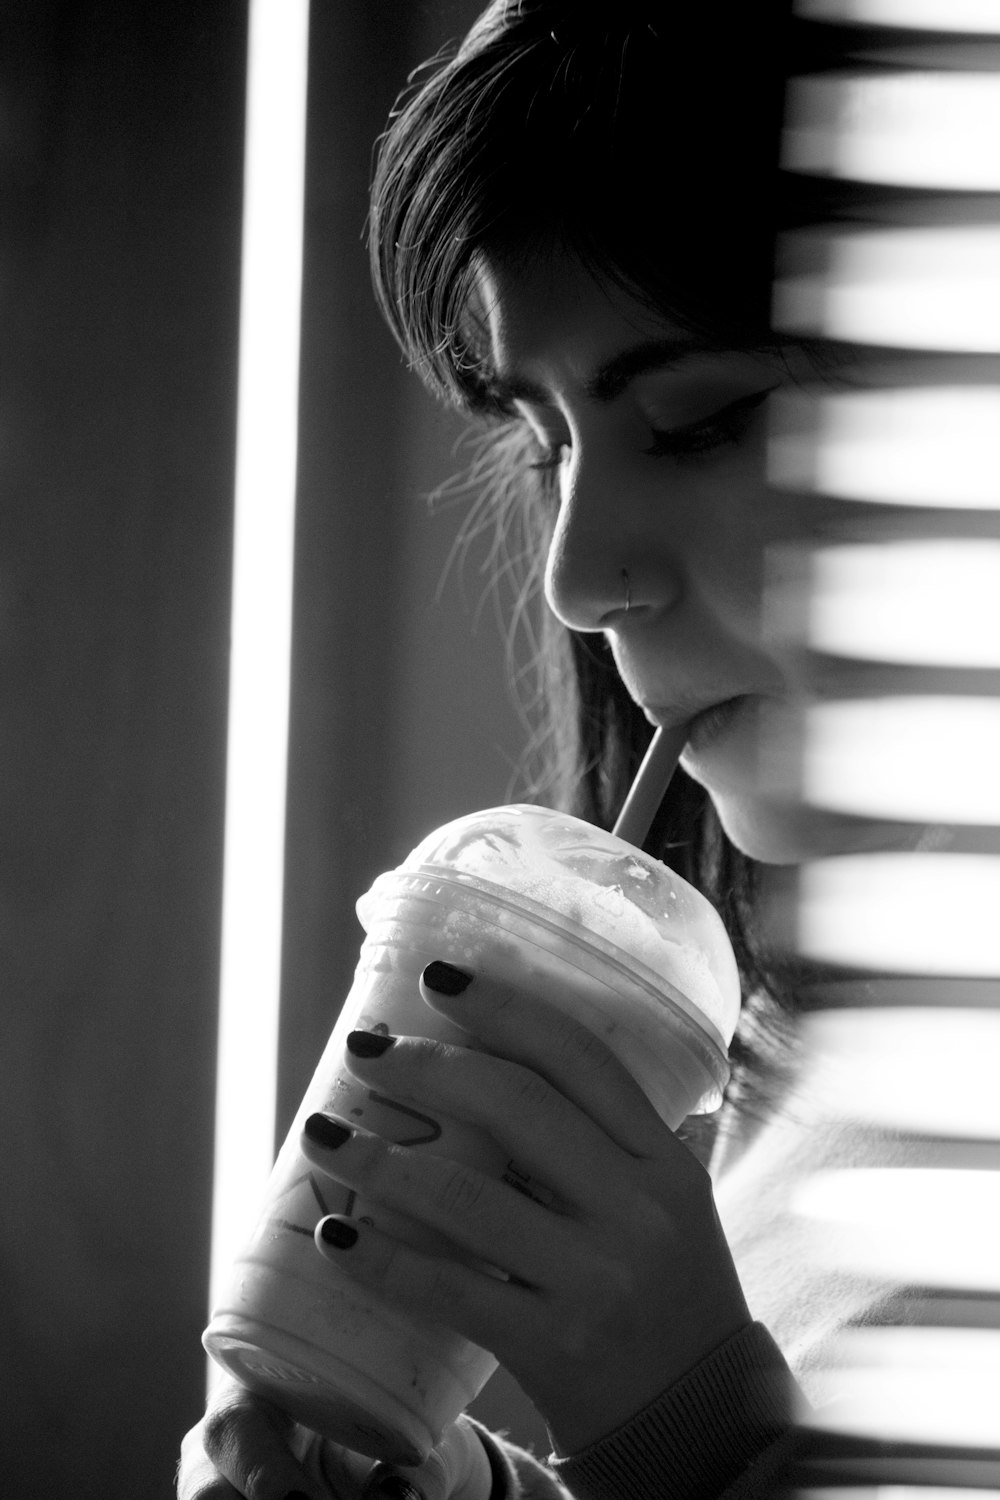 grayscale photo of woman drinking from plastic cup